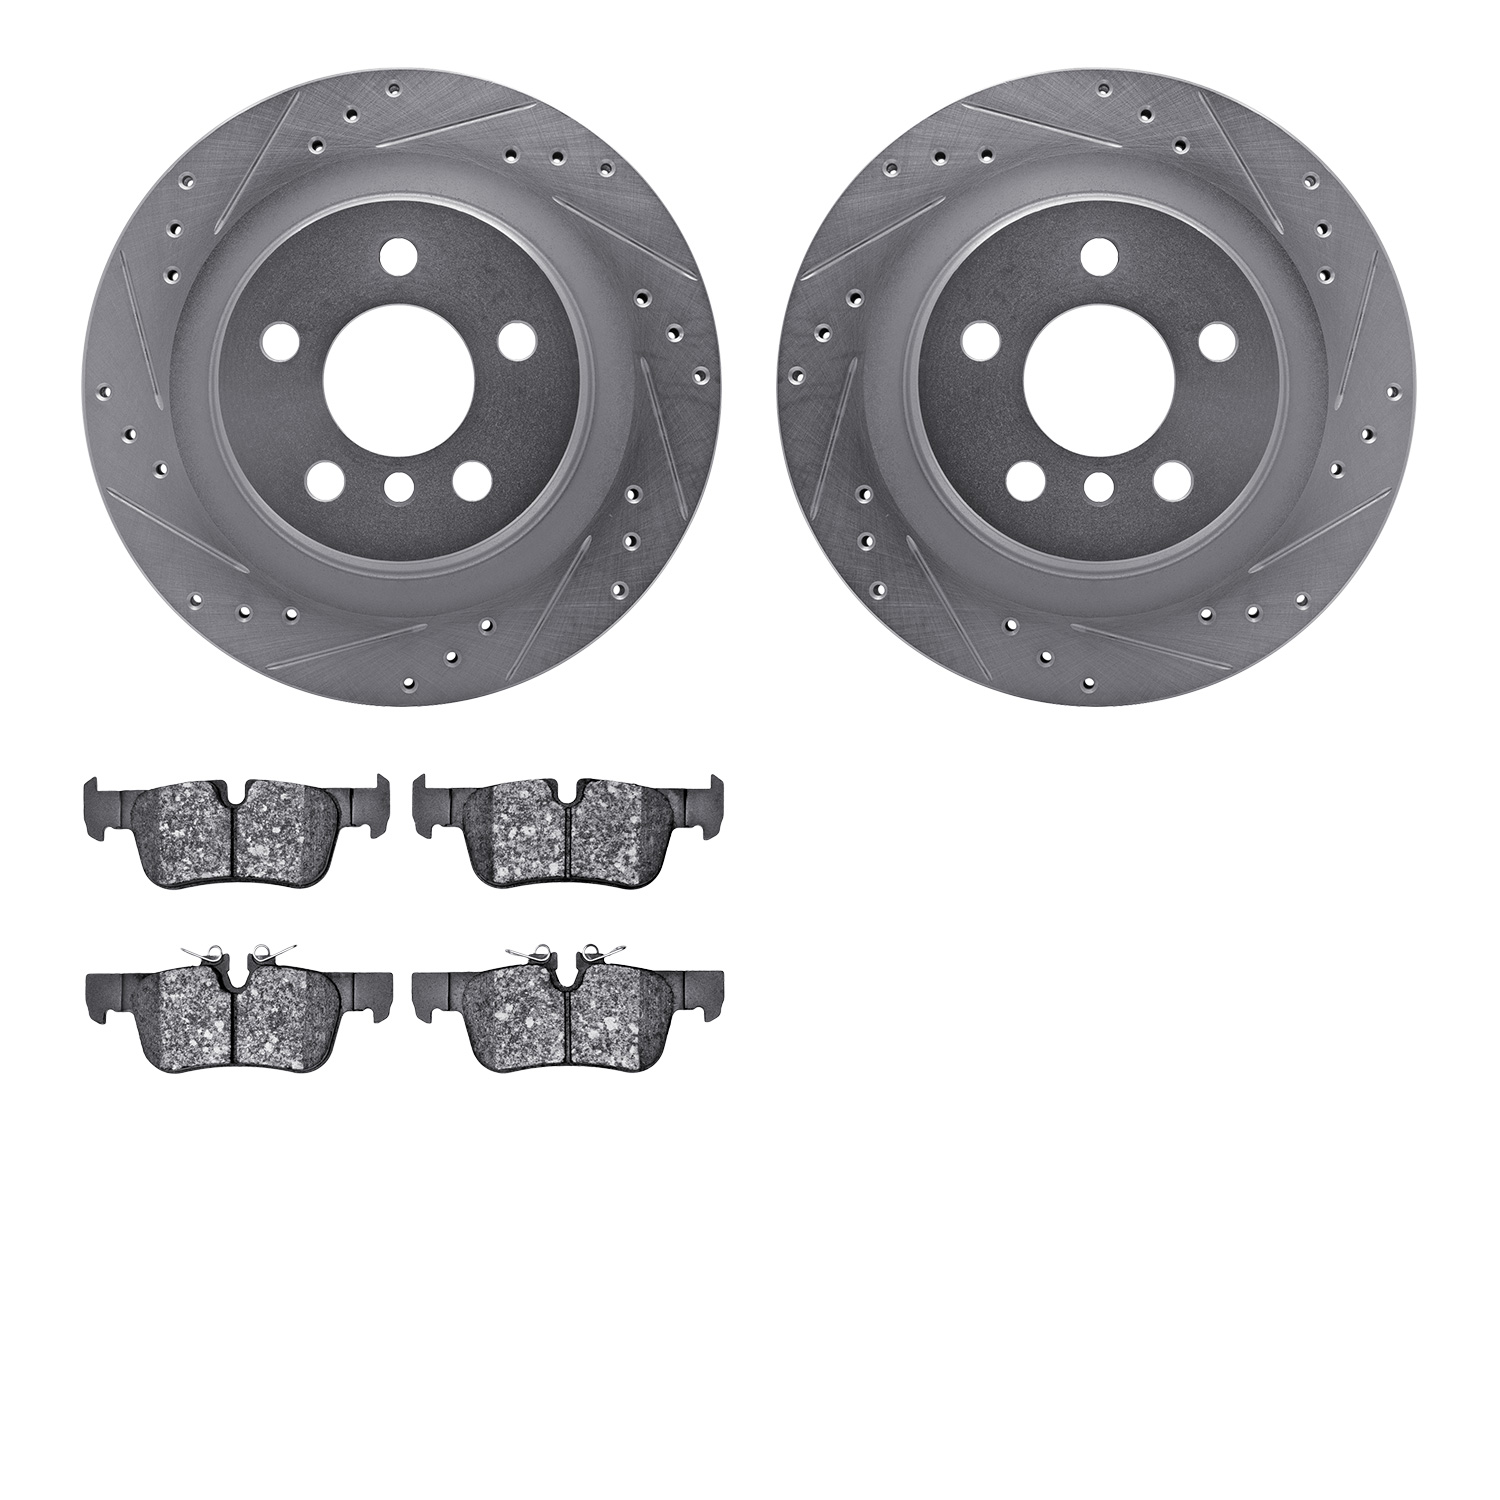 7502-31151 Drilled/Slotted Brake Rotors w/5000 Advanced Brake Pads Kit [Silver], Fits Select Multiple Makes/Models, Position: Re